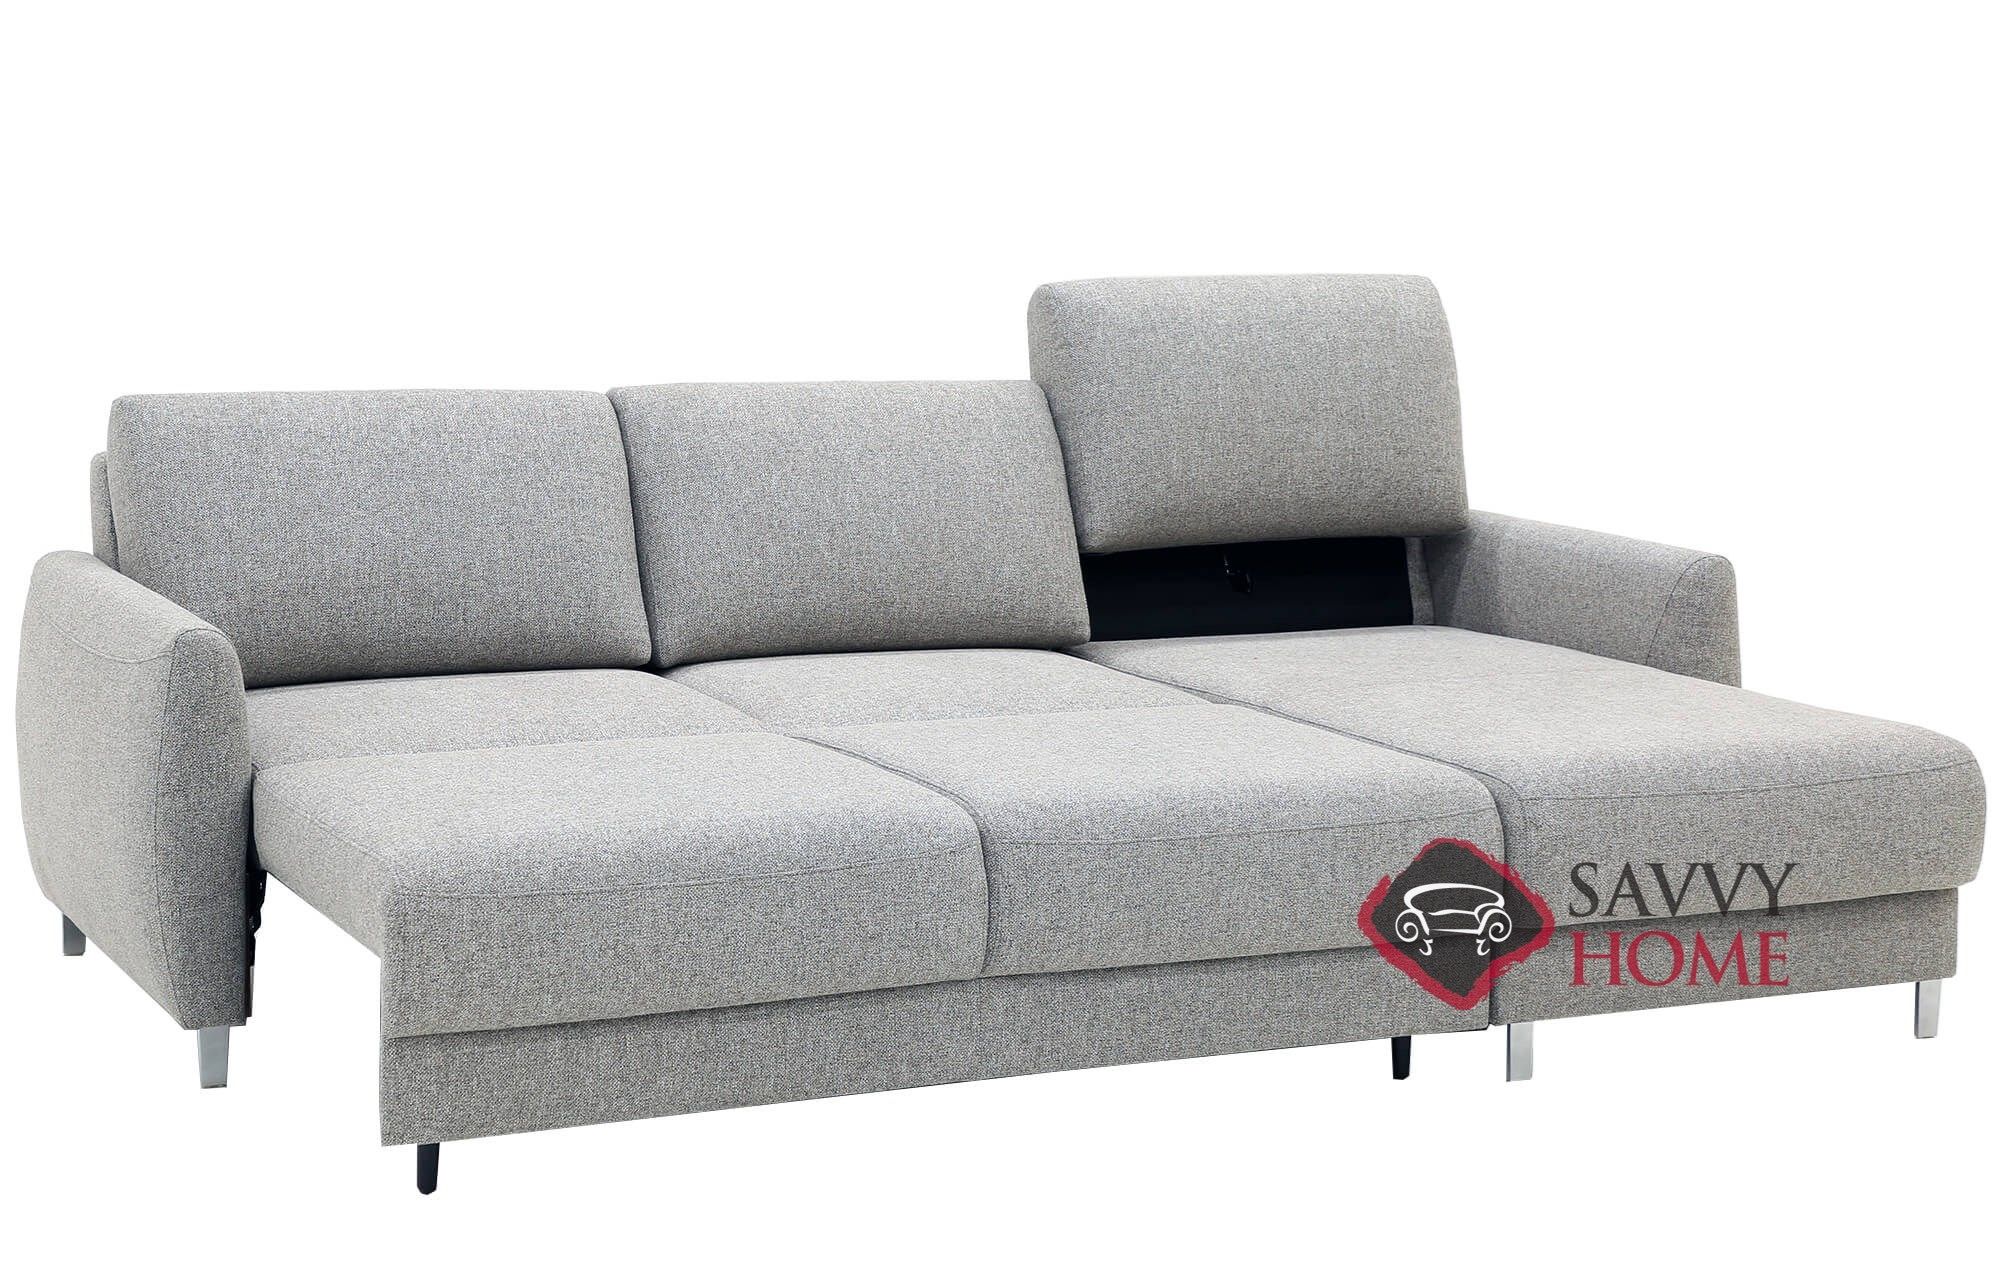 Quick Ship Delta Fabric Sleeper Sofas Chaise Sectional Inluonto With  Fast Shipping | Savvyhomestore Throughout Convertible Sofa With Matching Chaise (Gallery 19 of 20)